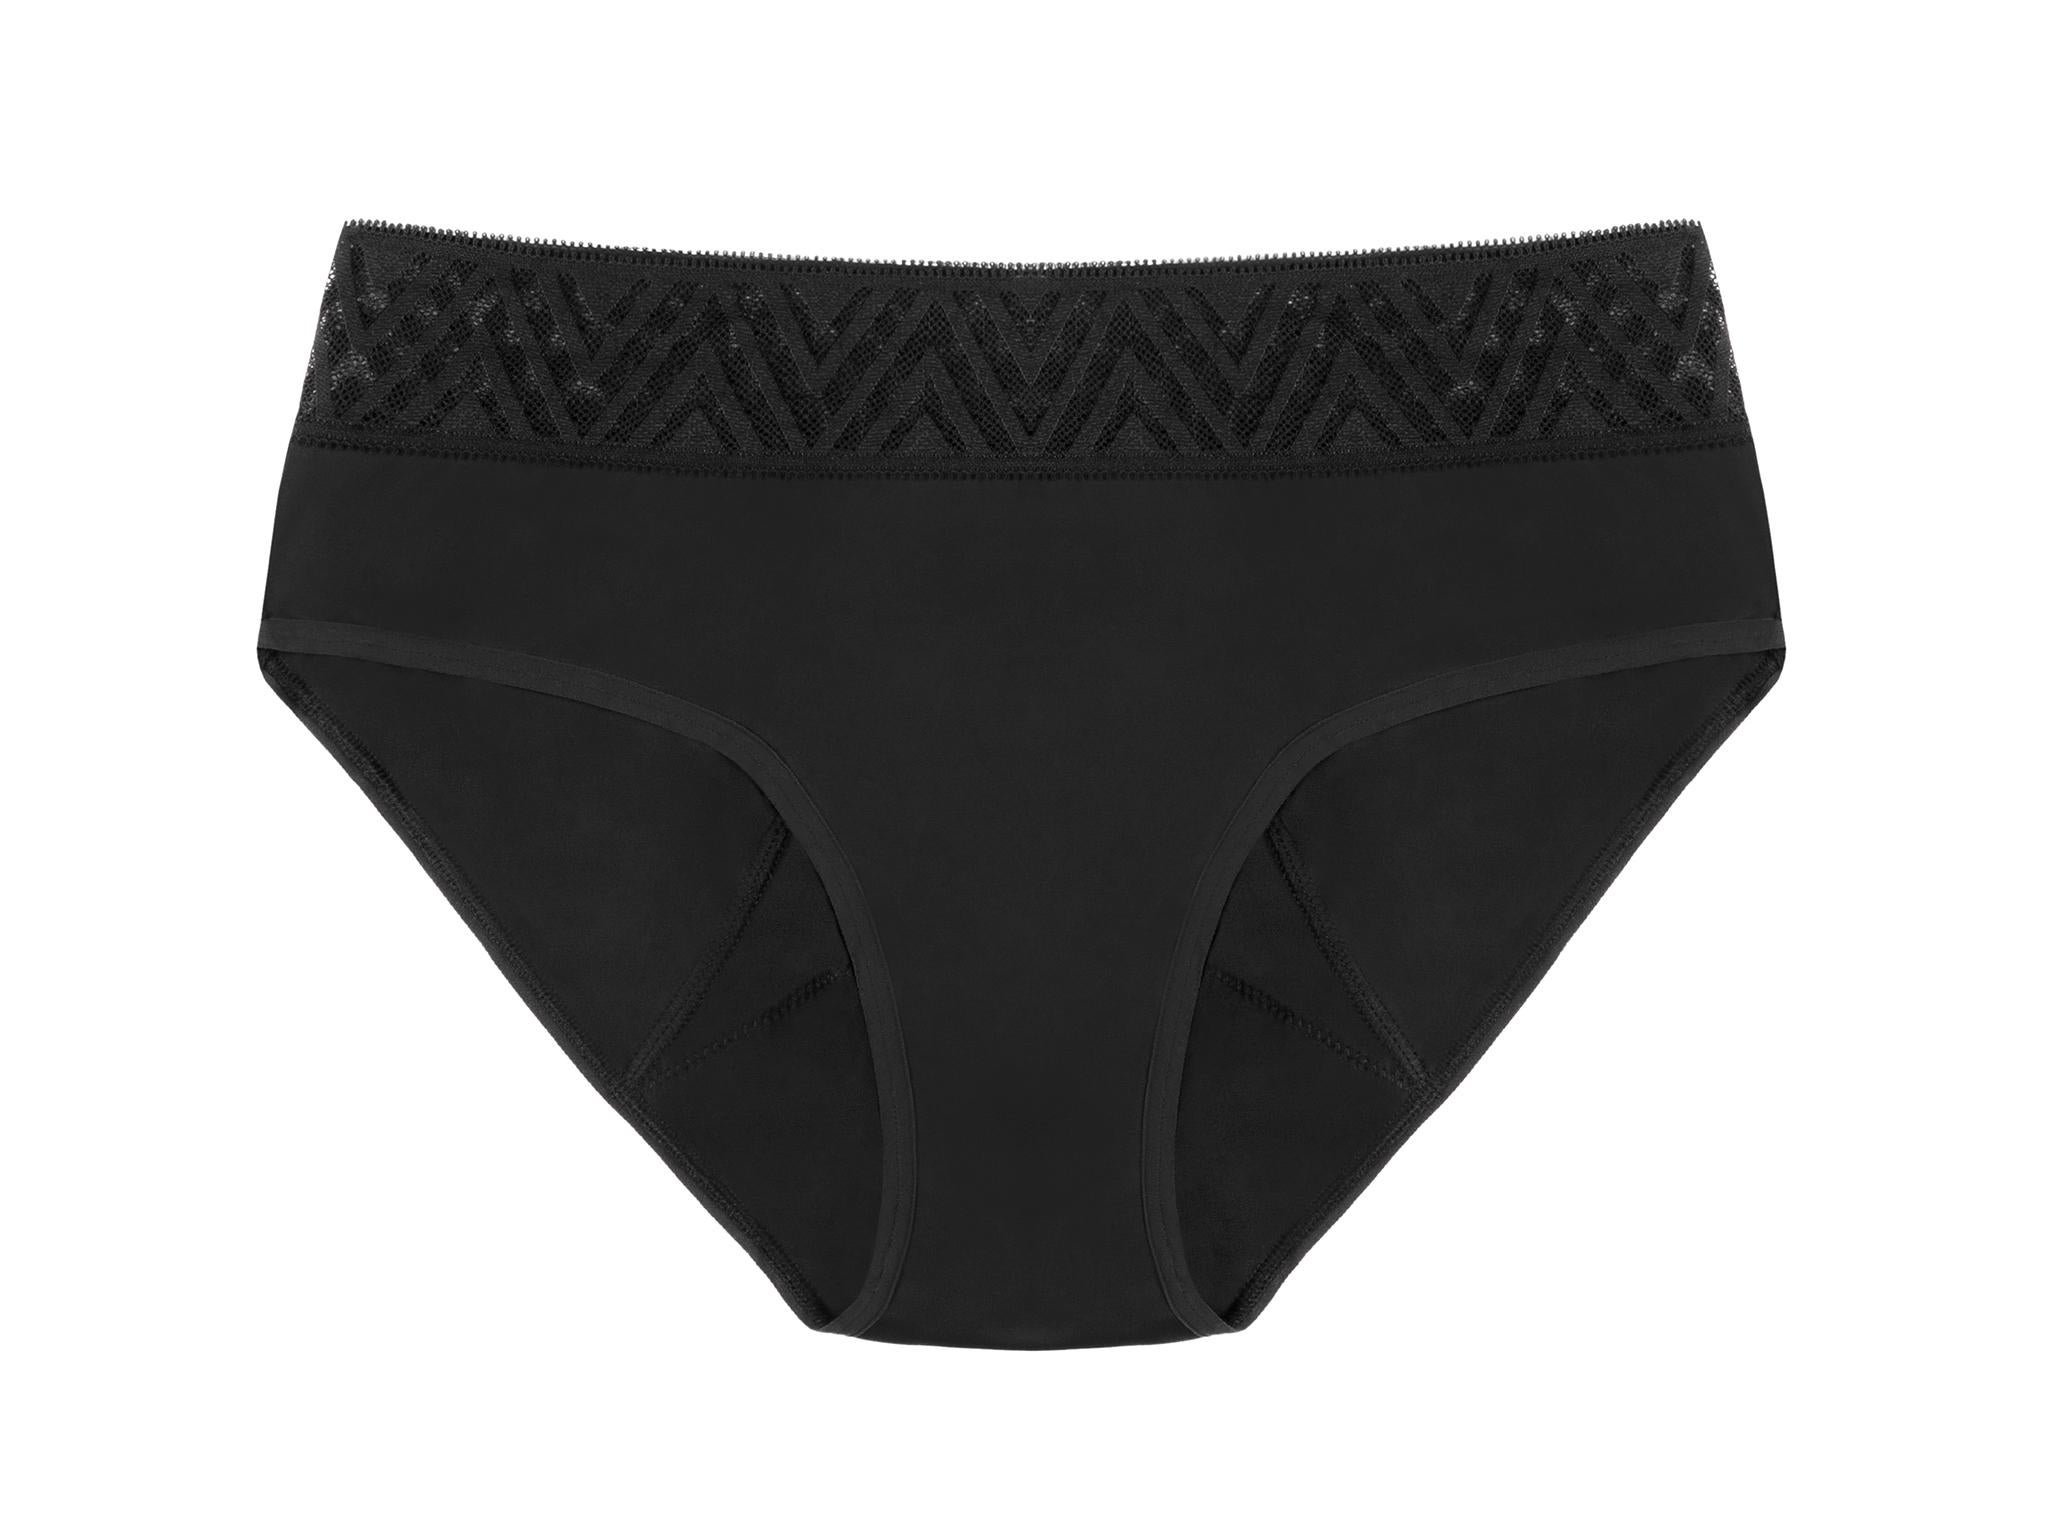 Thinx made padded underwear that you wear on your period without any other products and still be protected by any leaks (Thinx)